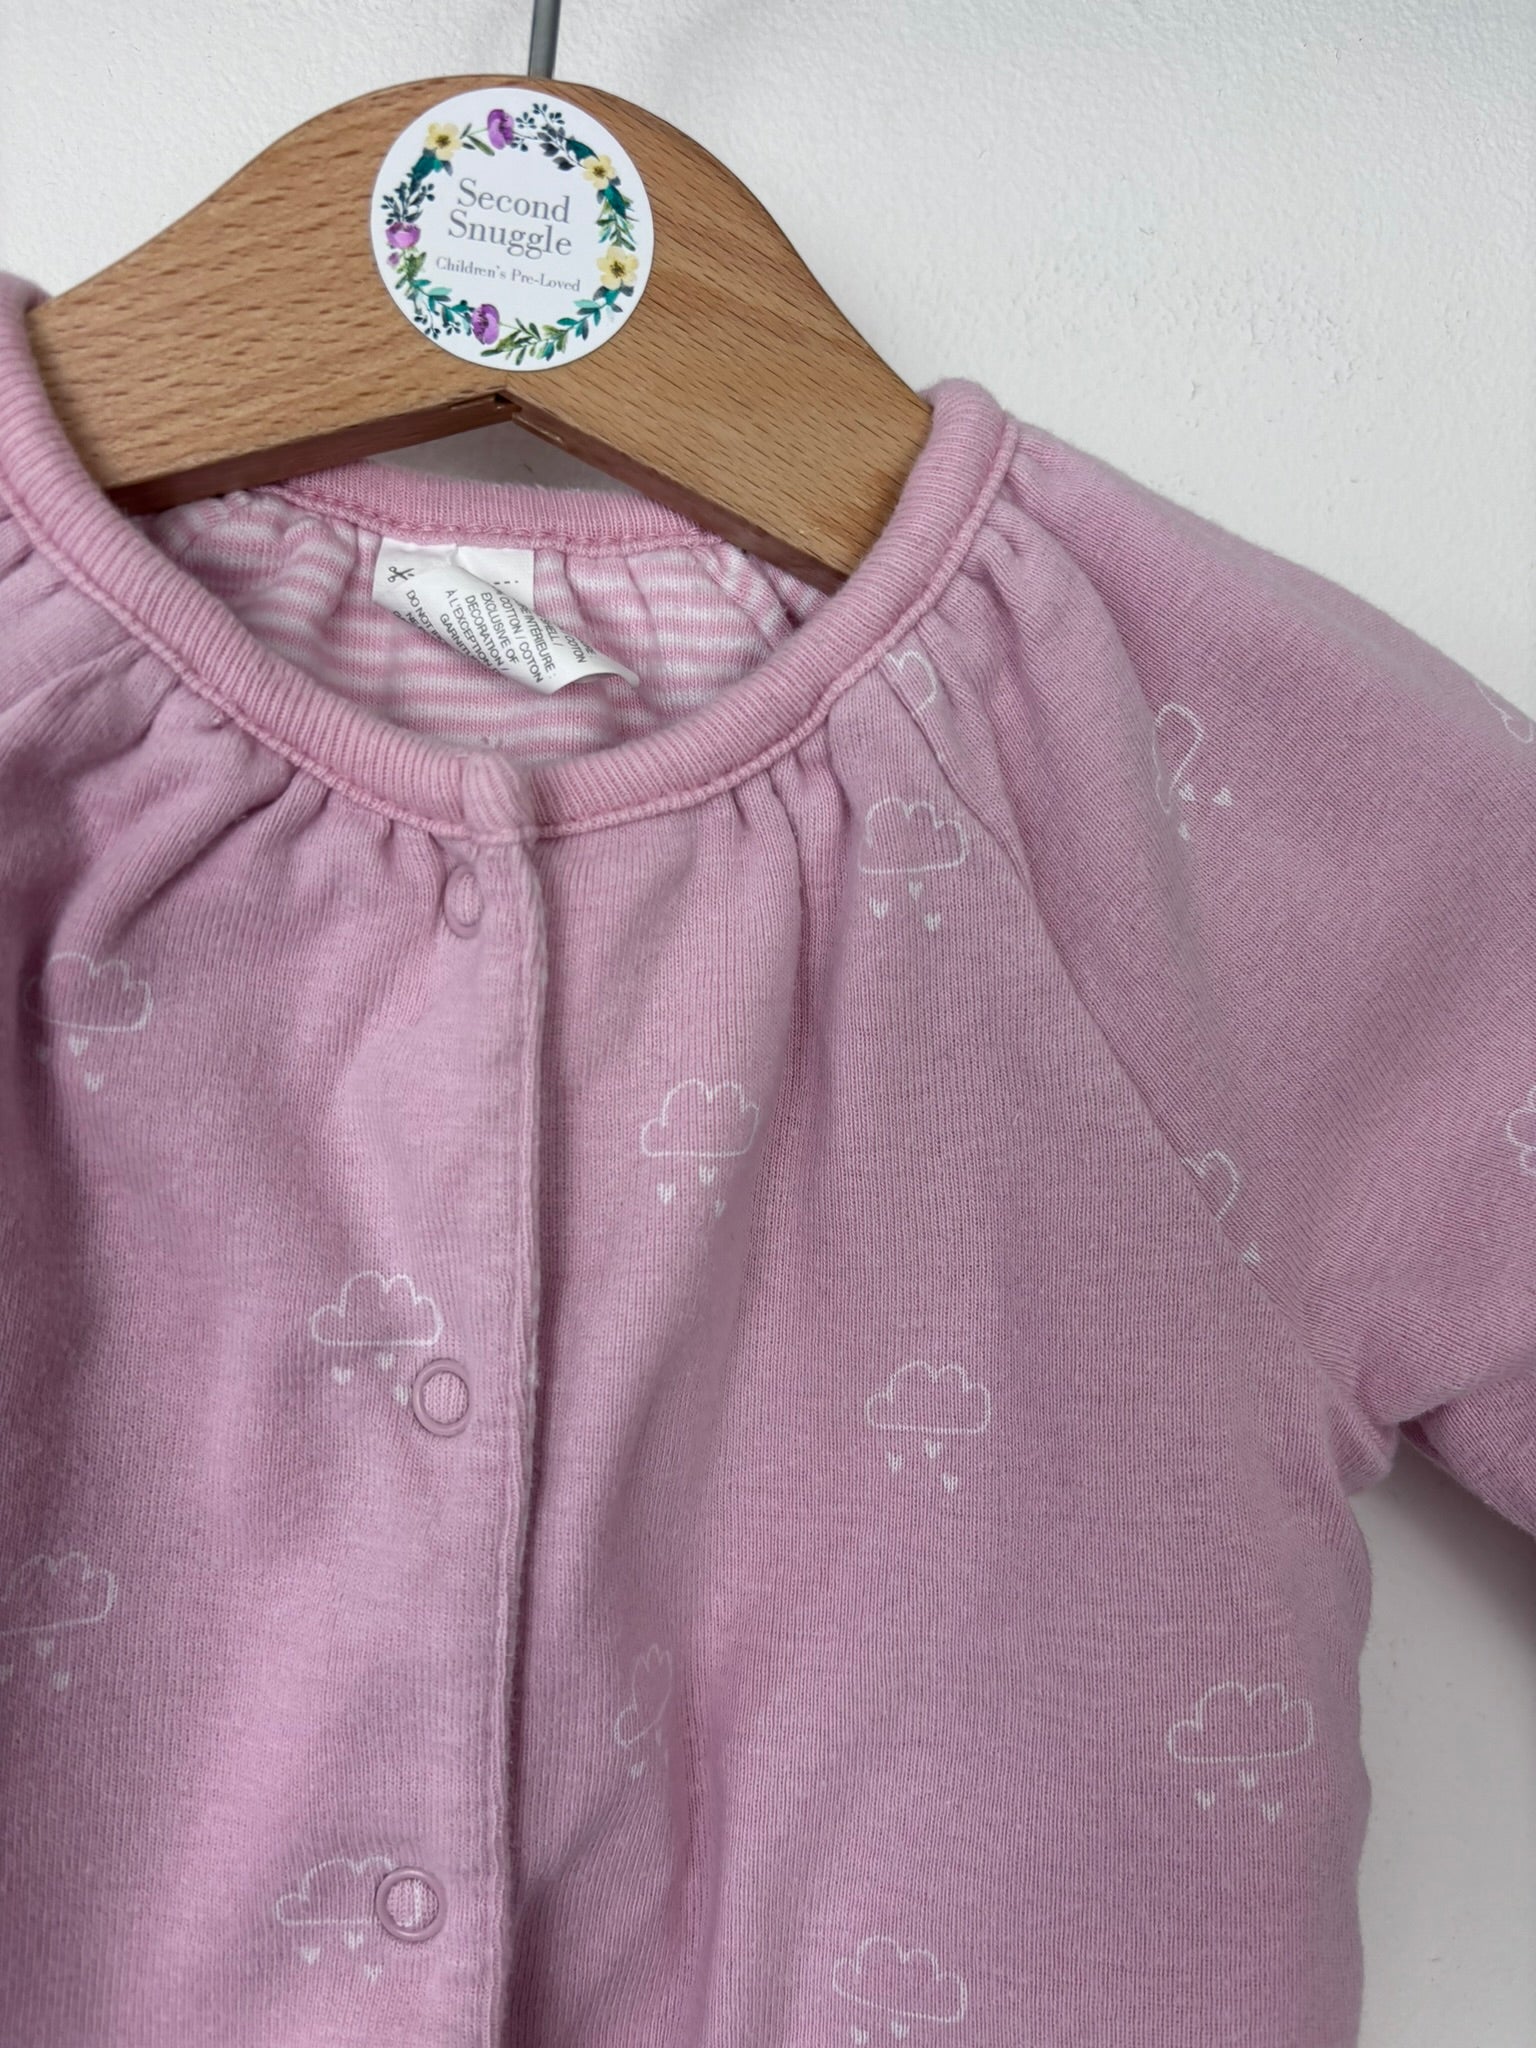 Baby Gap 0-3 Months-Cardigans-Second Snuggle Preloved